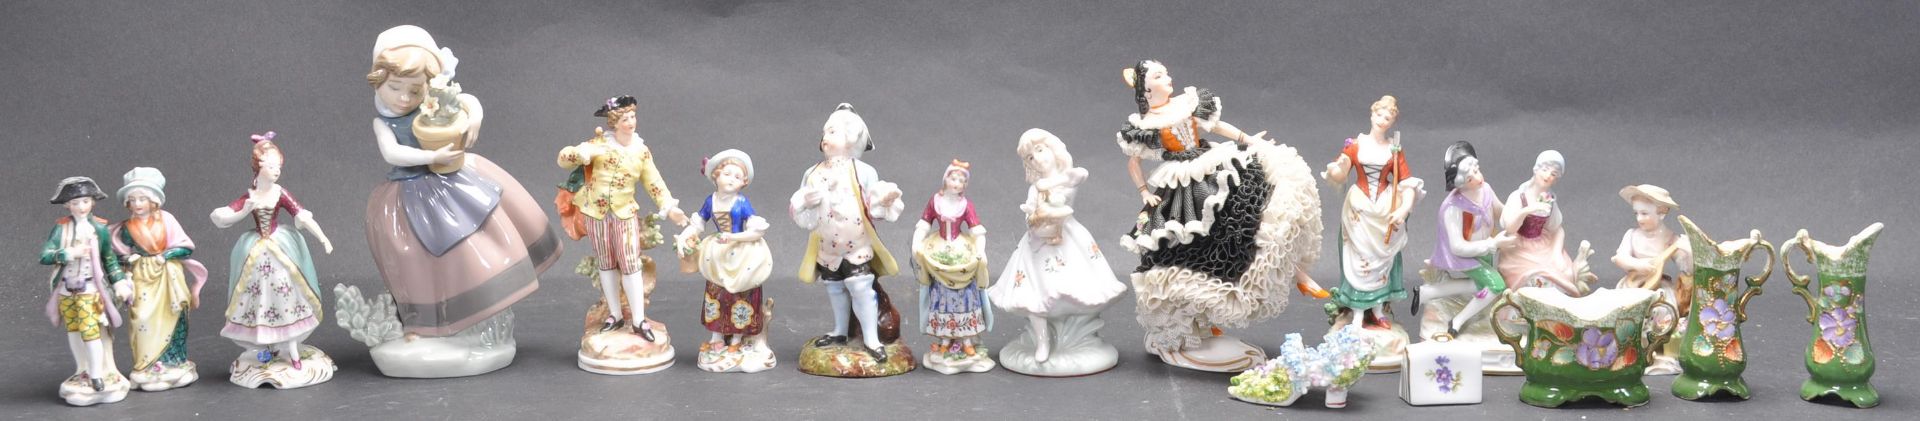 LARGE COLLECTION OF EARLY 20TH CENTURY CONTINENTAL FIGURINES